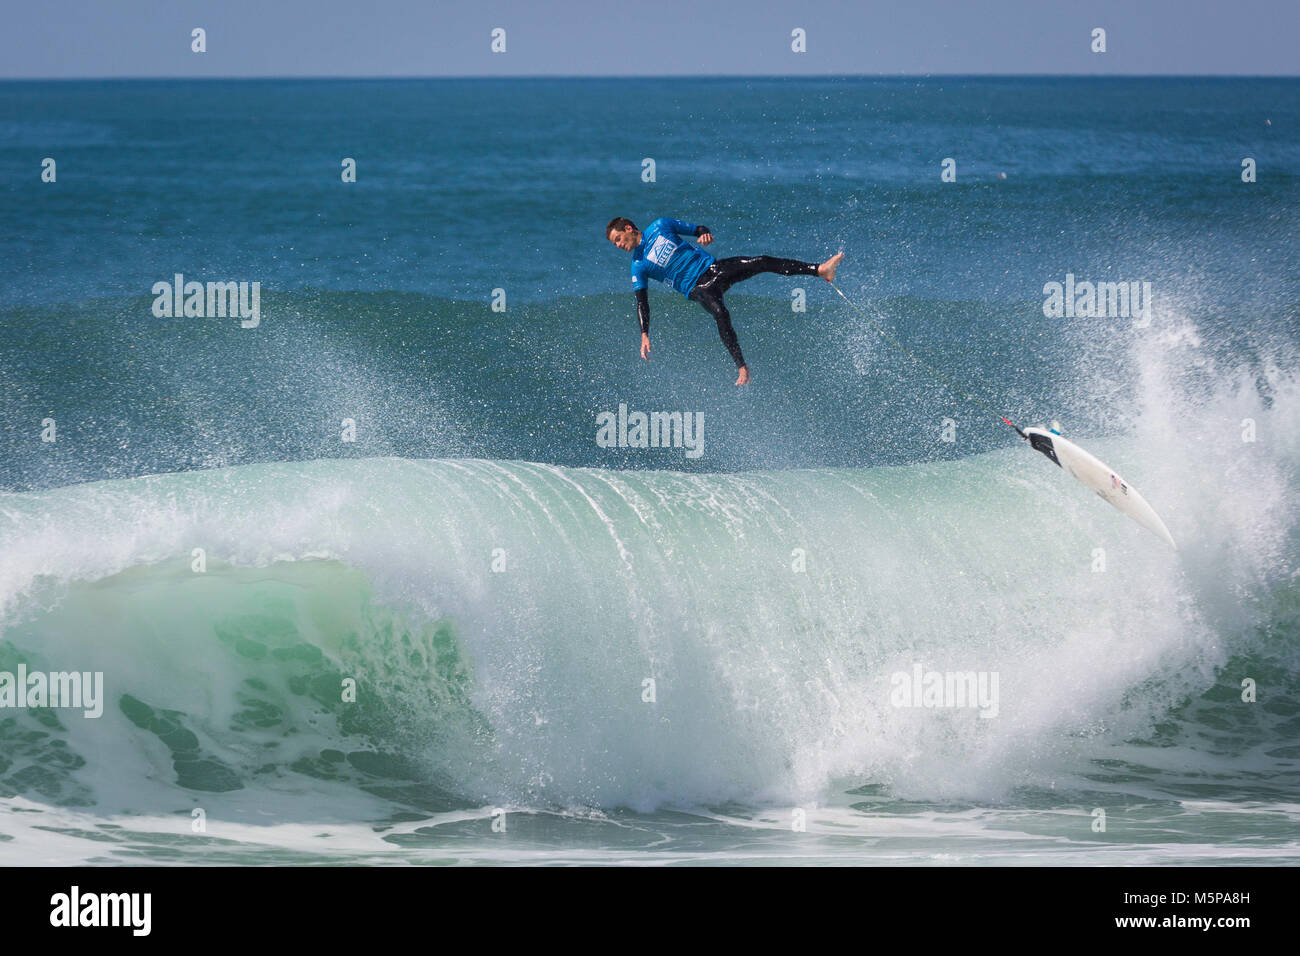 February 24, 2018 - NazarÃ, Leiria, Portugal - Surfer: Filipe Jervis, Portuguese seen at the CapÃtulo Perfeito event..An event that brings together some of the best free surfers in the country and the world in a tube competition at Praia do Norte, NazarÃ©. It happened on the 24th of February and the winner was William Aliotti. (Credit Image: © Capitulo Perfeito-023.jpg/SOPA Images via ZUMA Wire) Stock Photo